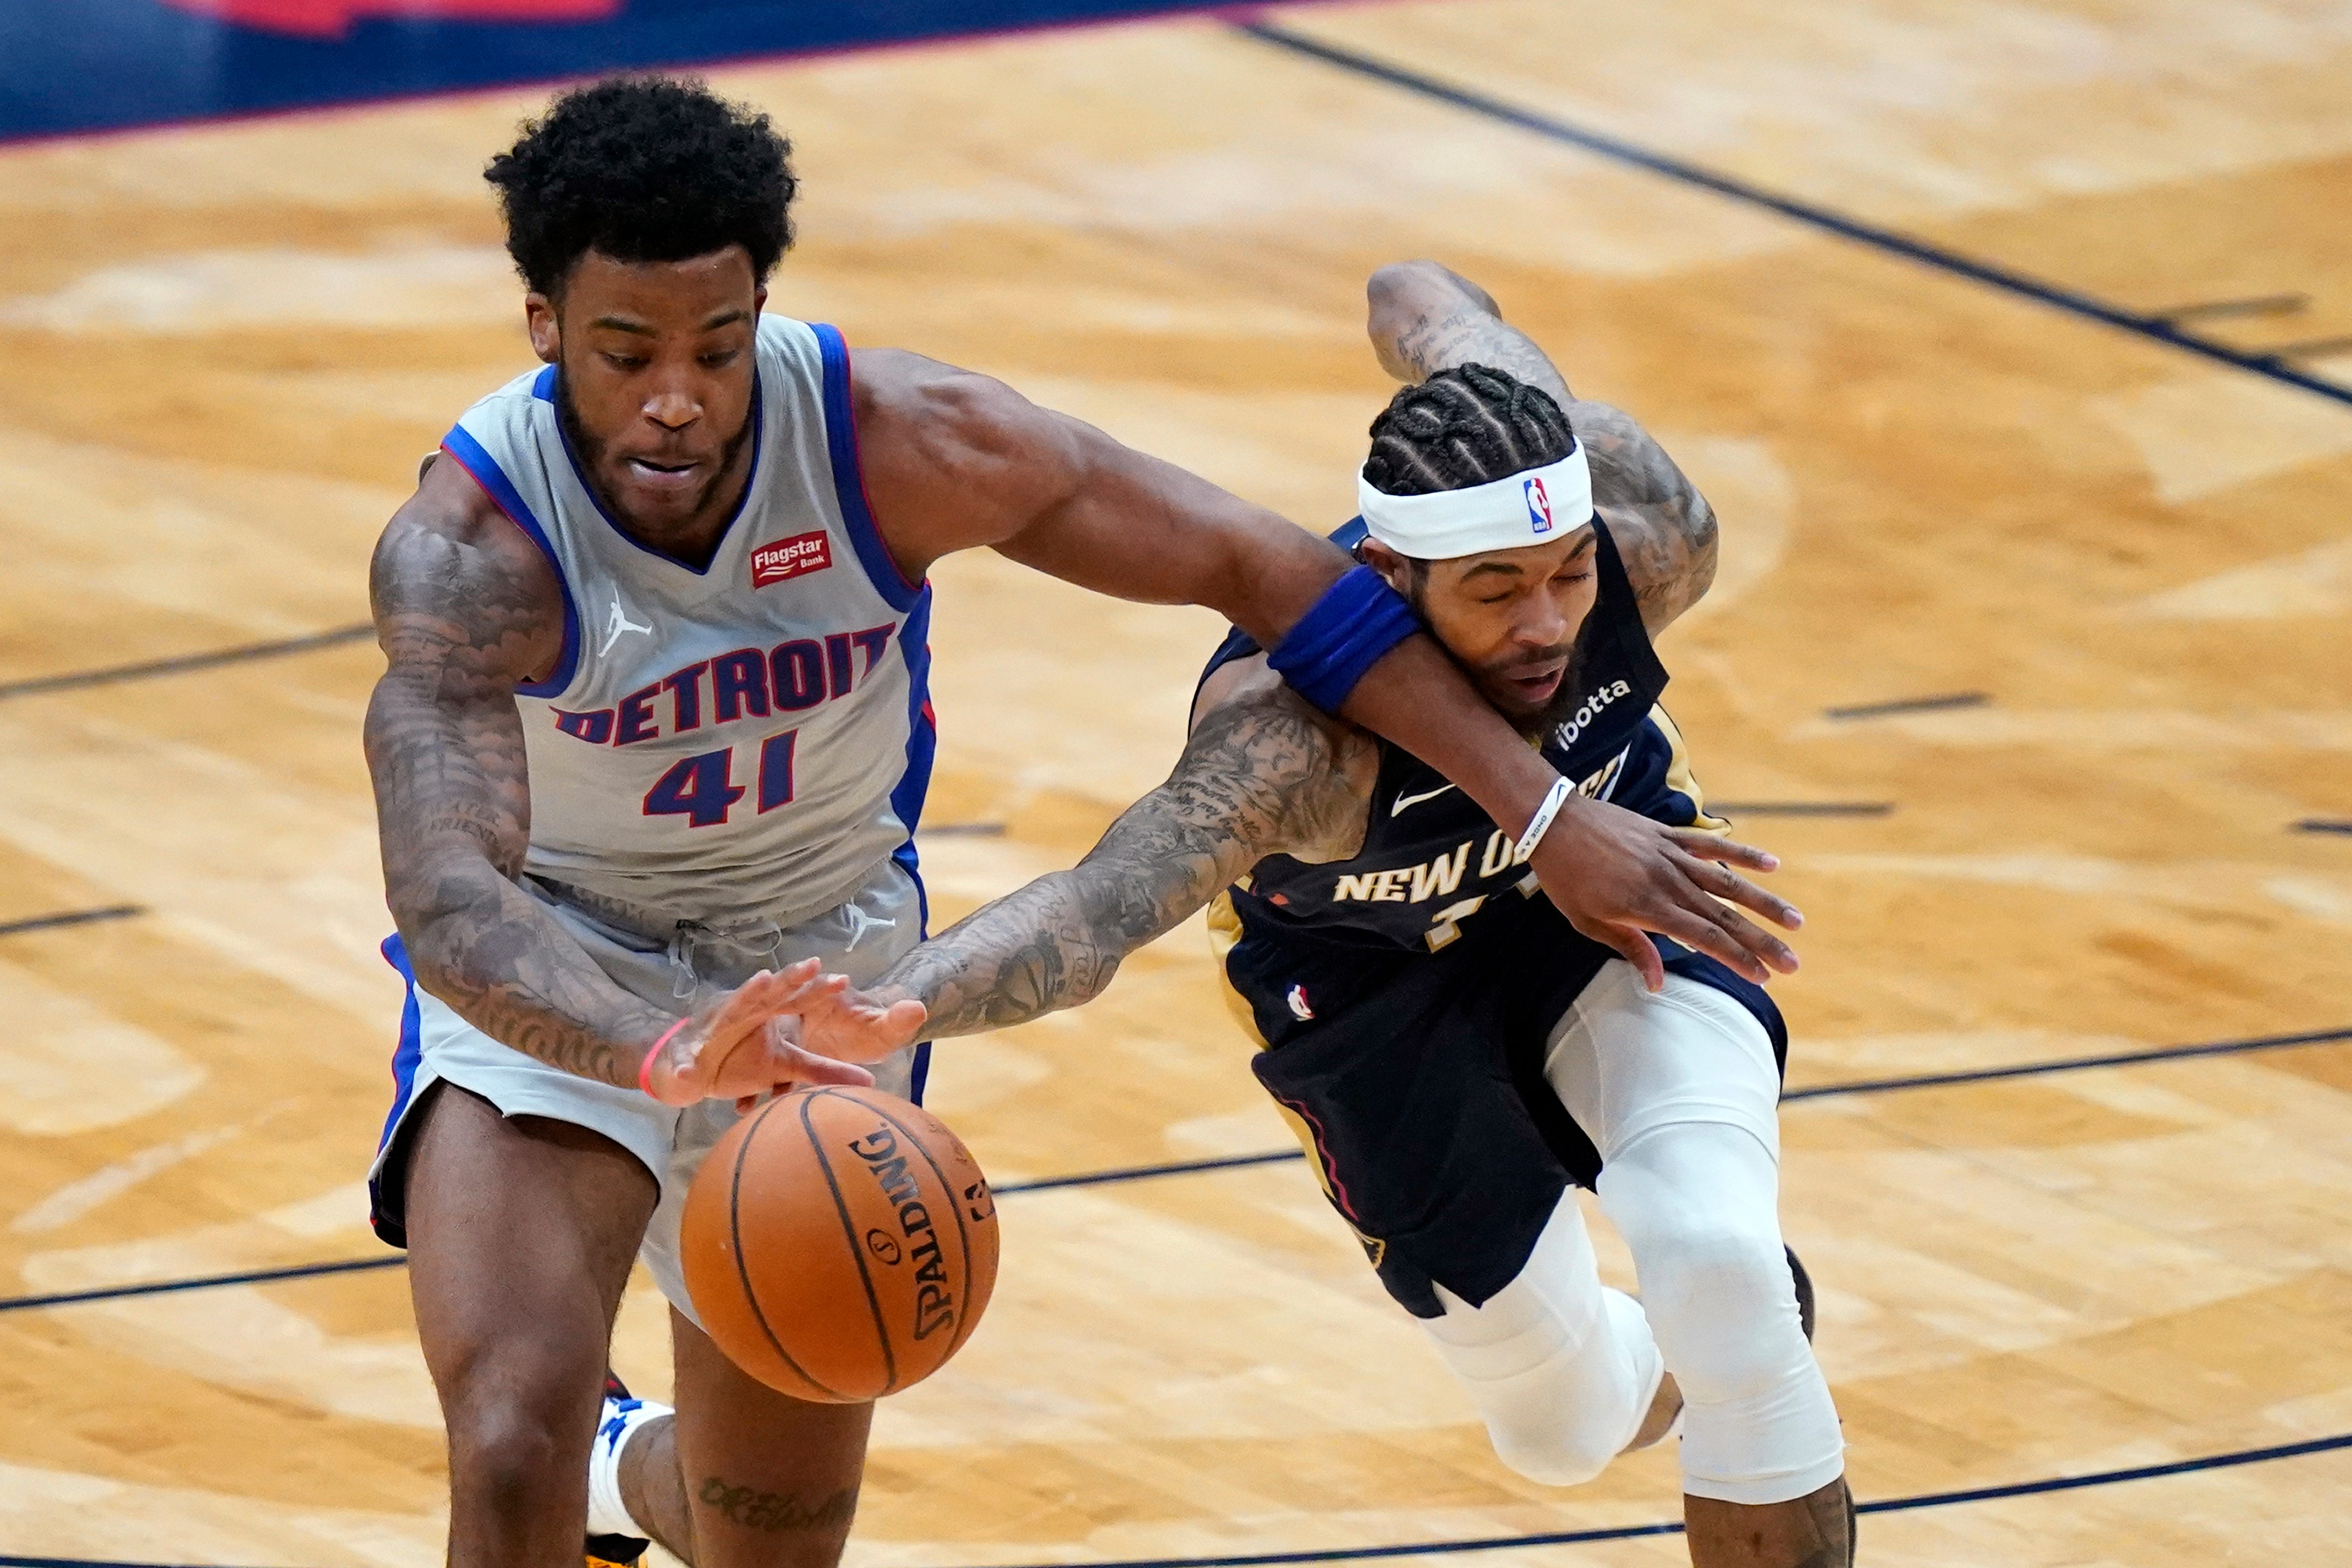 Detroit Pistons forward Saddiq Bey (41) and New Orleans Pelicans forward Brandon Ingram reach for the ball during the first half of an NBA basketball game in New Orleans, Wednesday, Feb. 24, 2021.